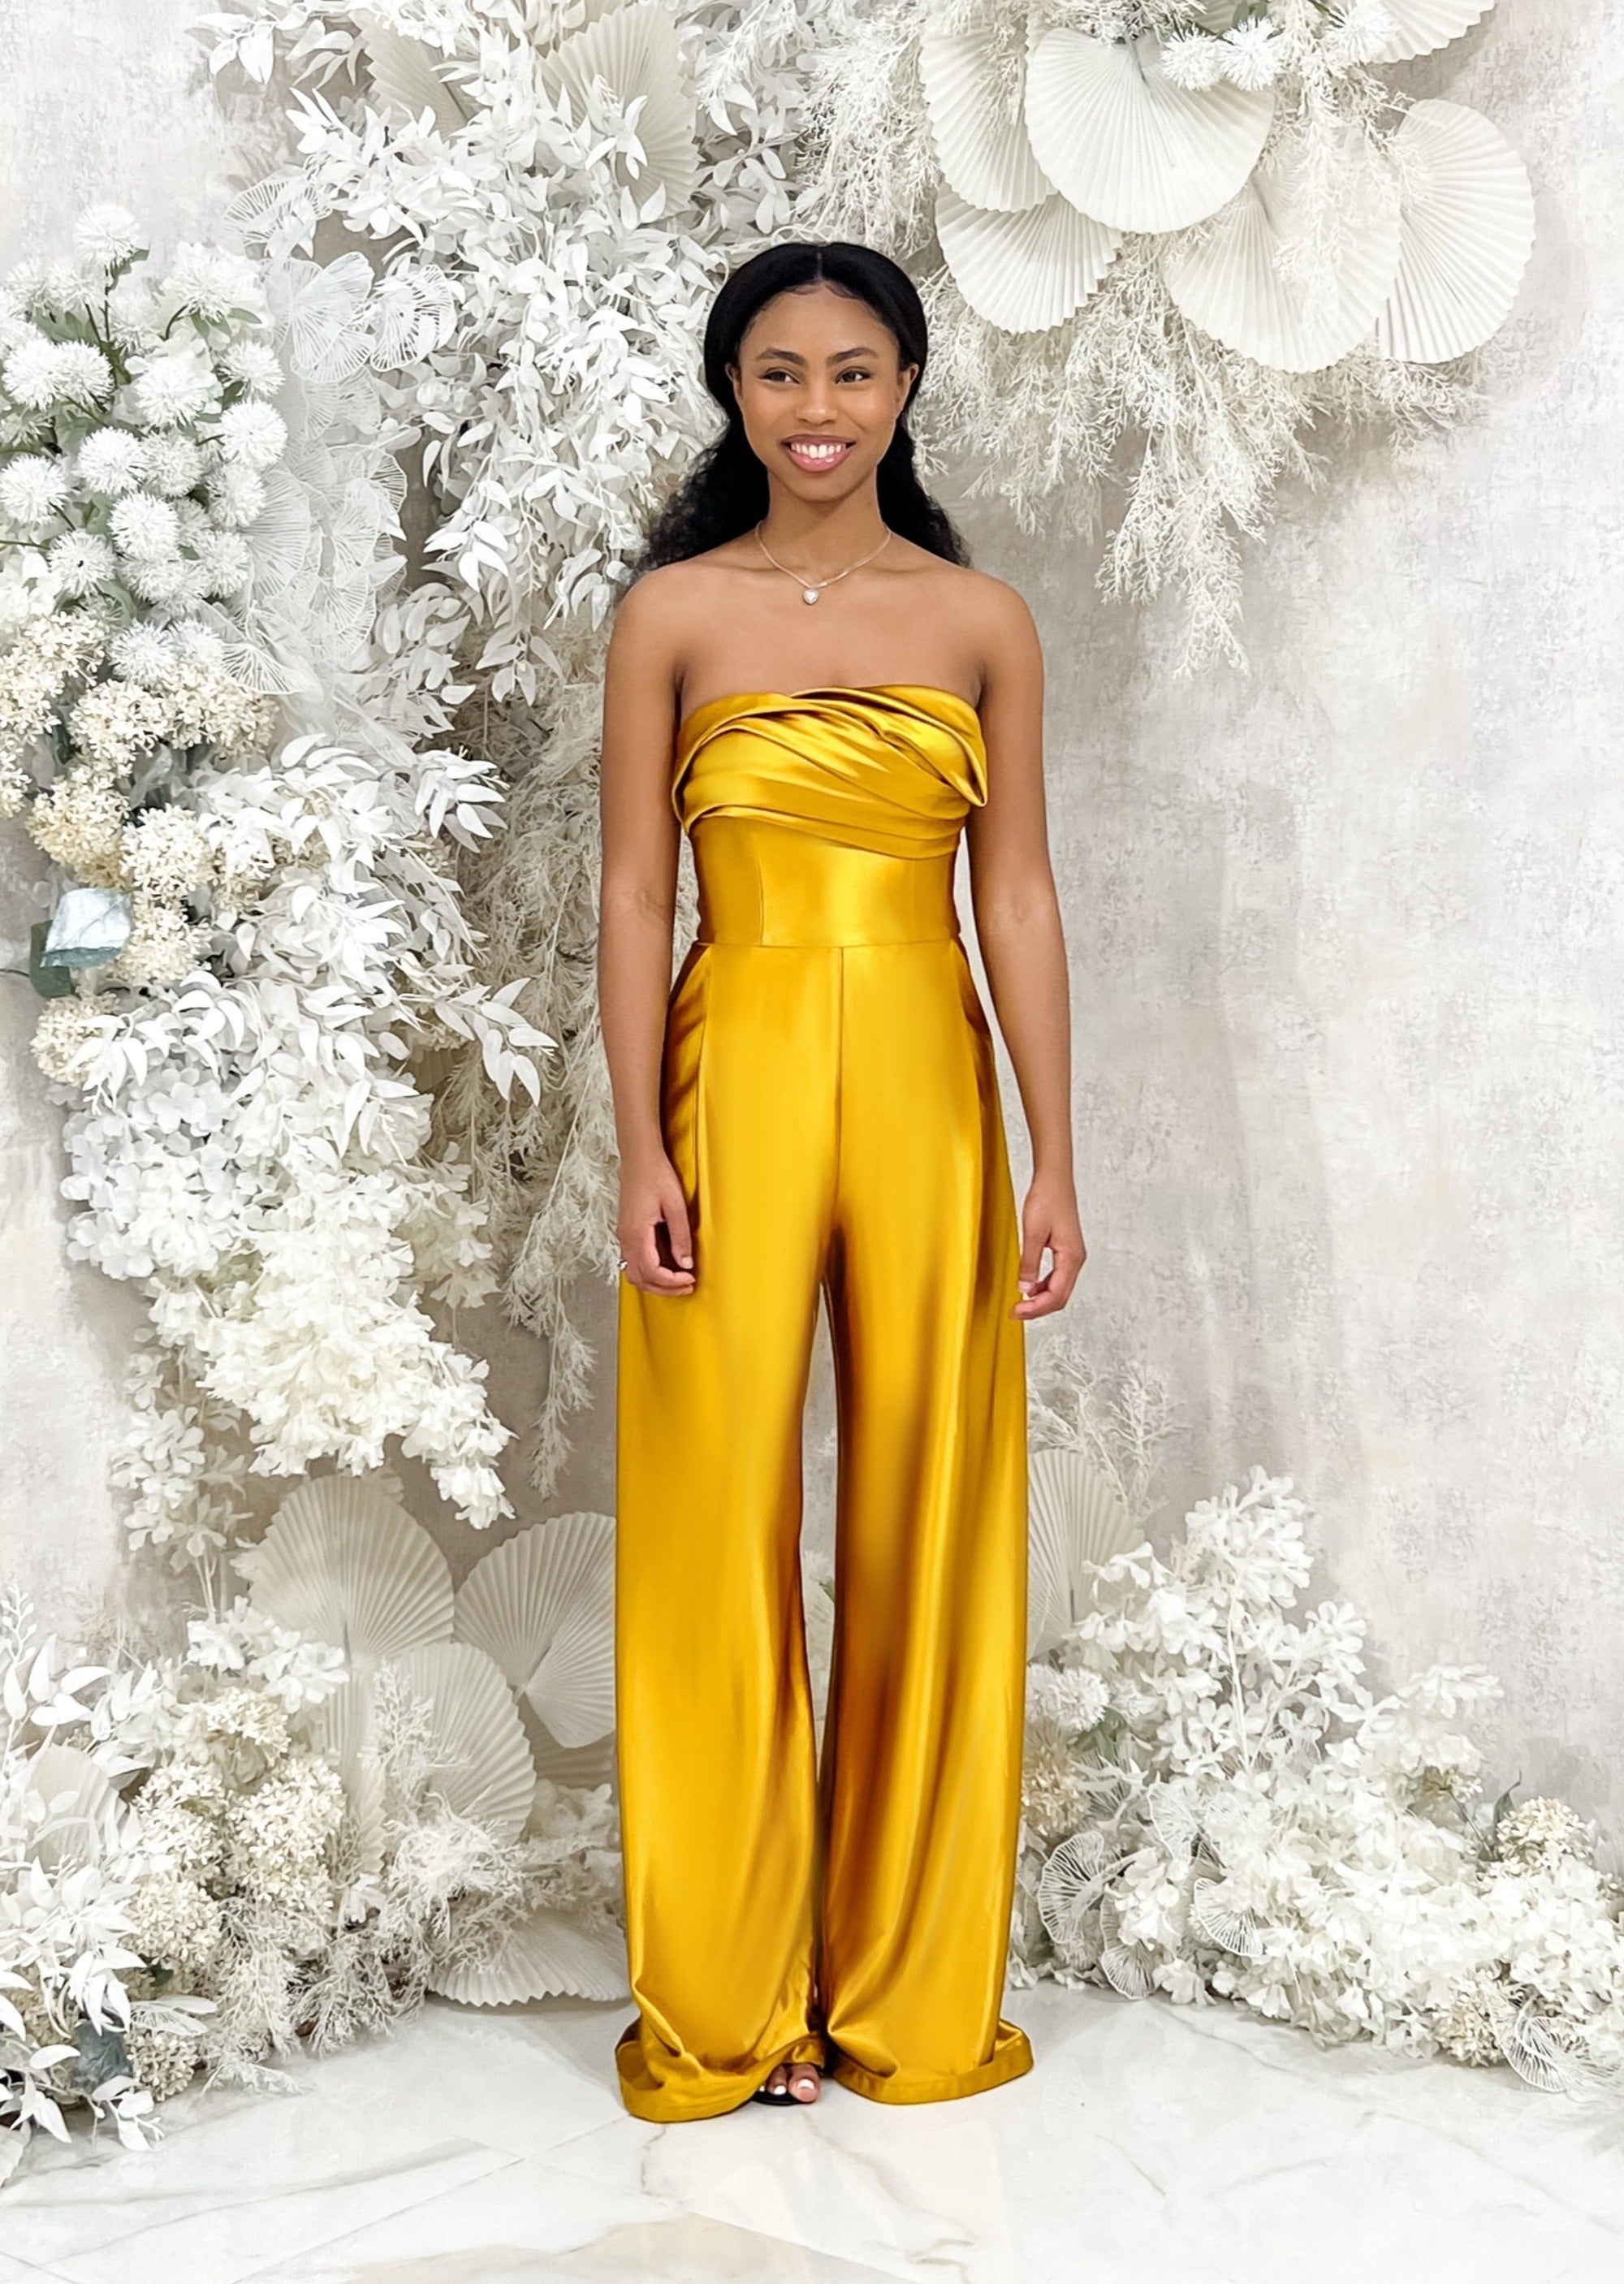 Bridesmaid wearing a modern strapless fitted bridesmaid jumpsuit with stretch. Style has a curved architectural detailing at the neck and is shown in a golden vibrant yellow on a black model.